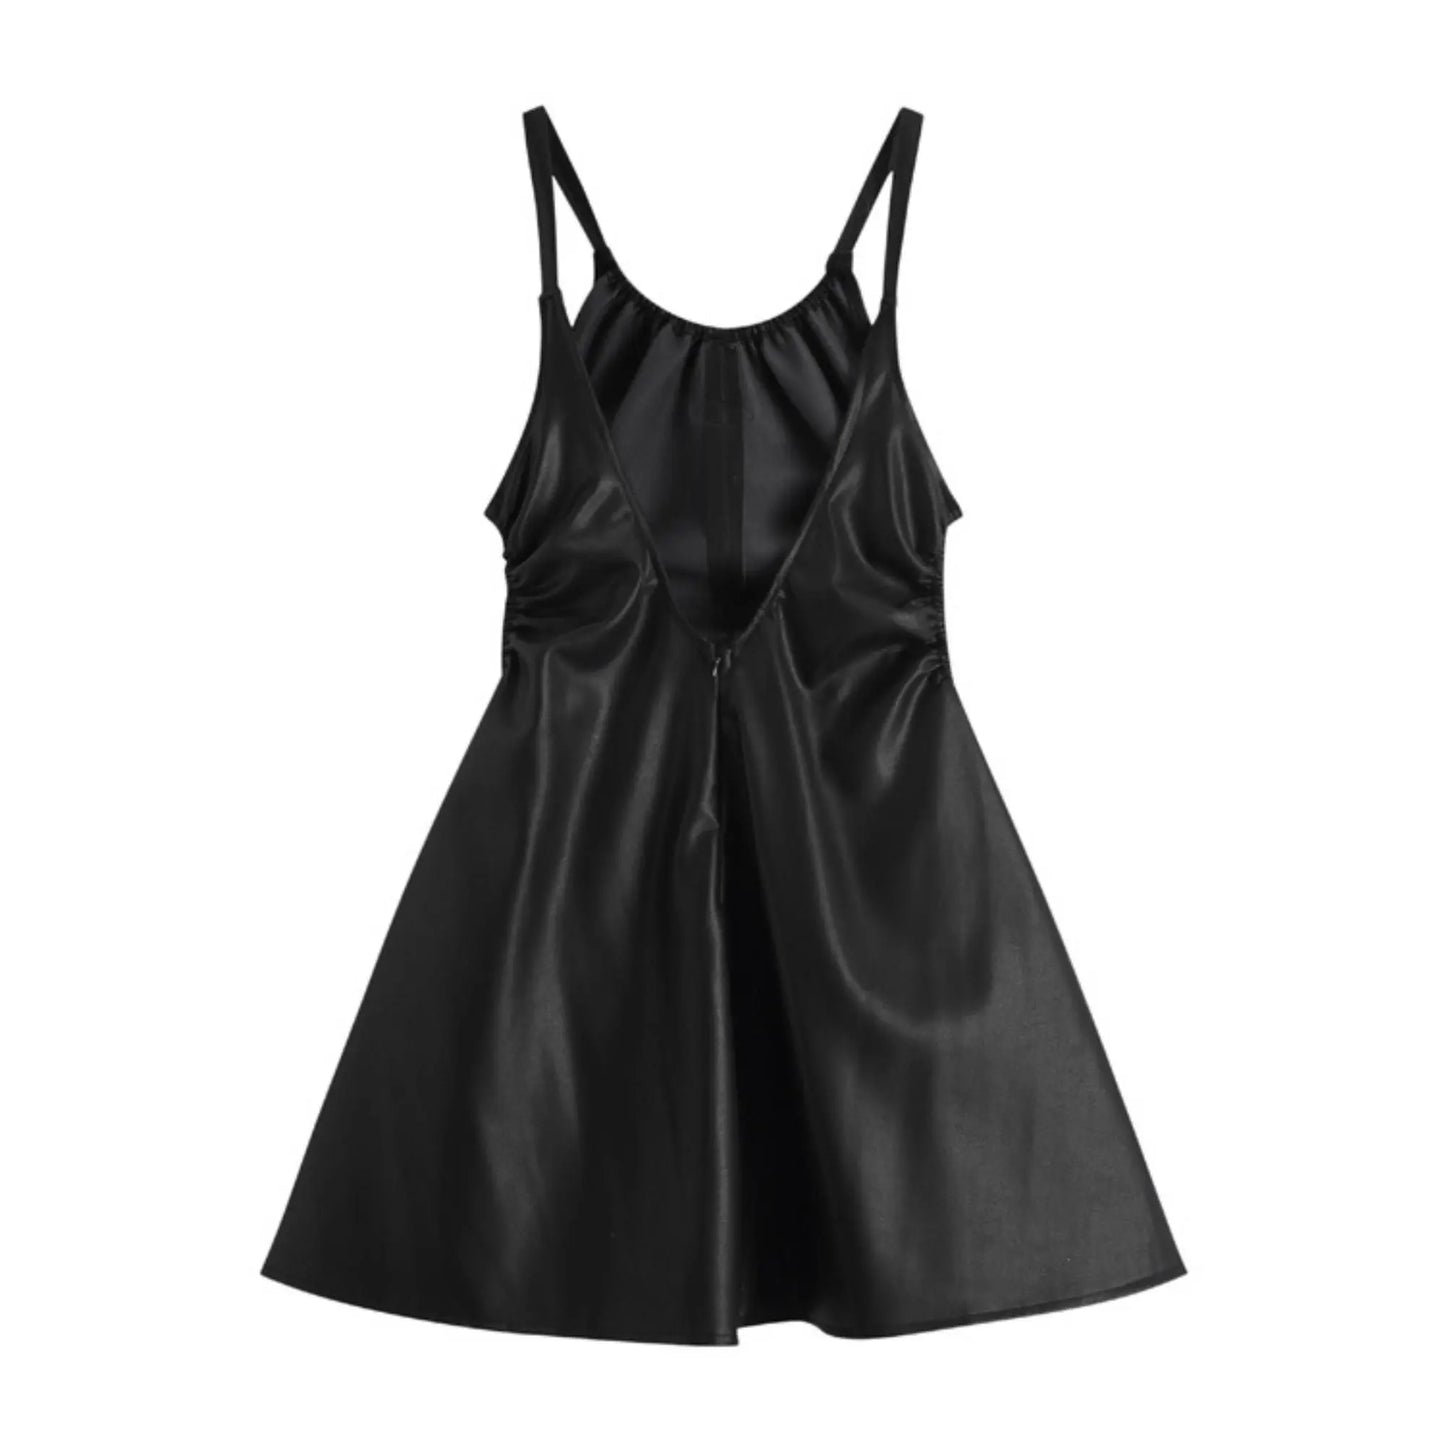 'Lash Up' PU Leather Hollow Out Strappy Dress AlielNosirrah